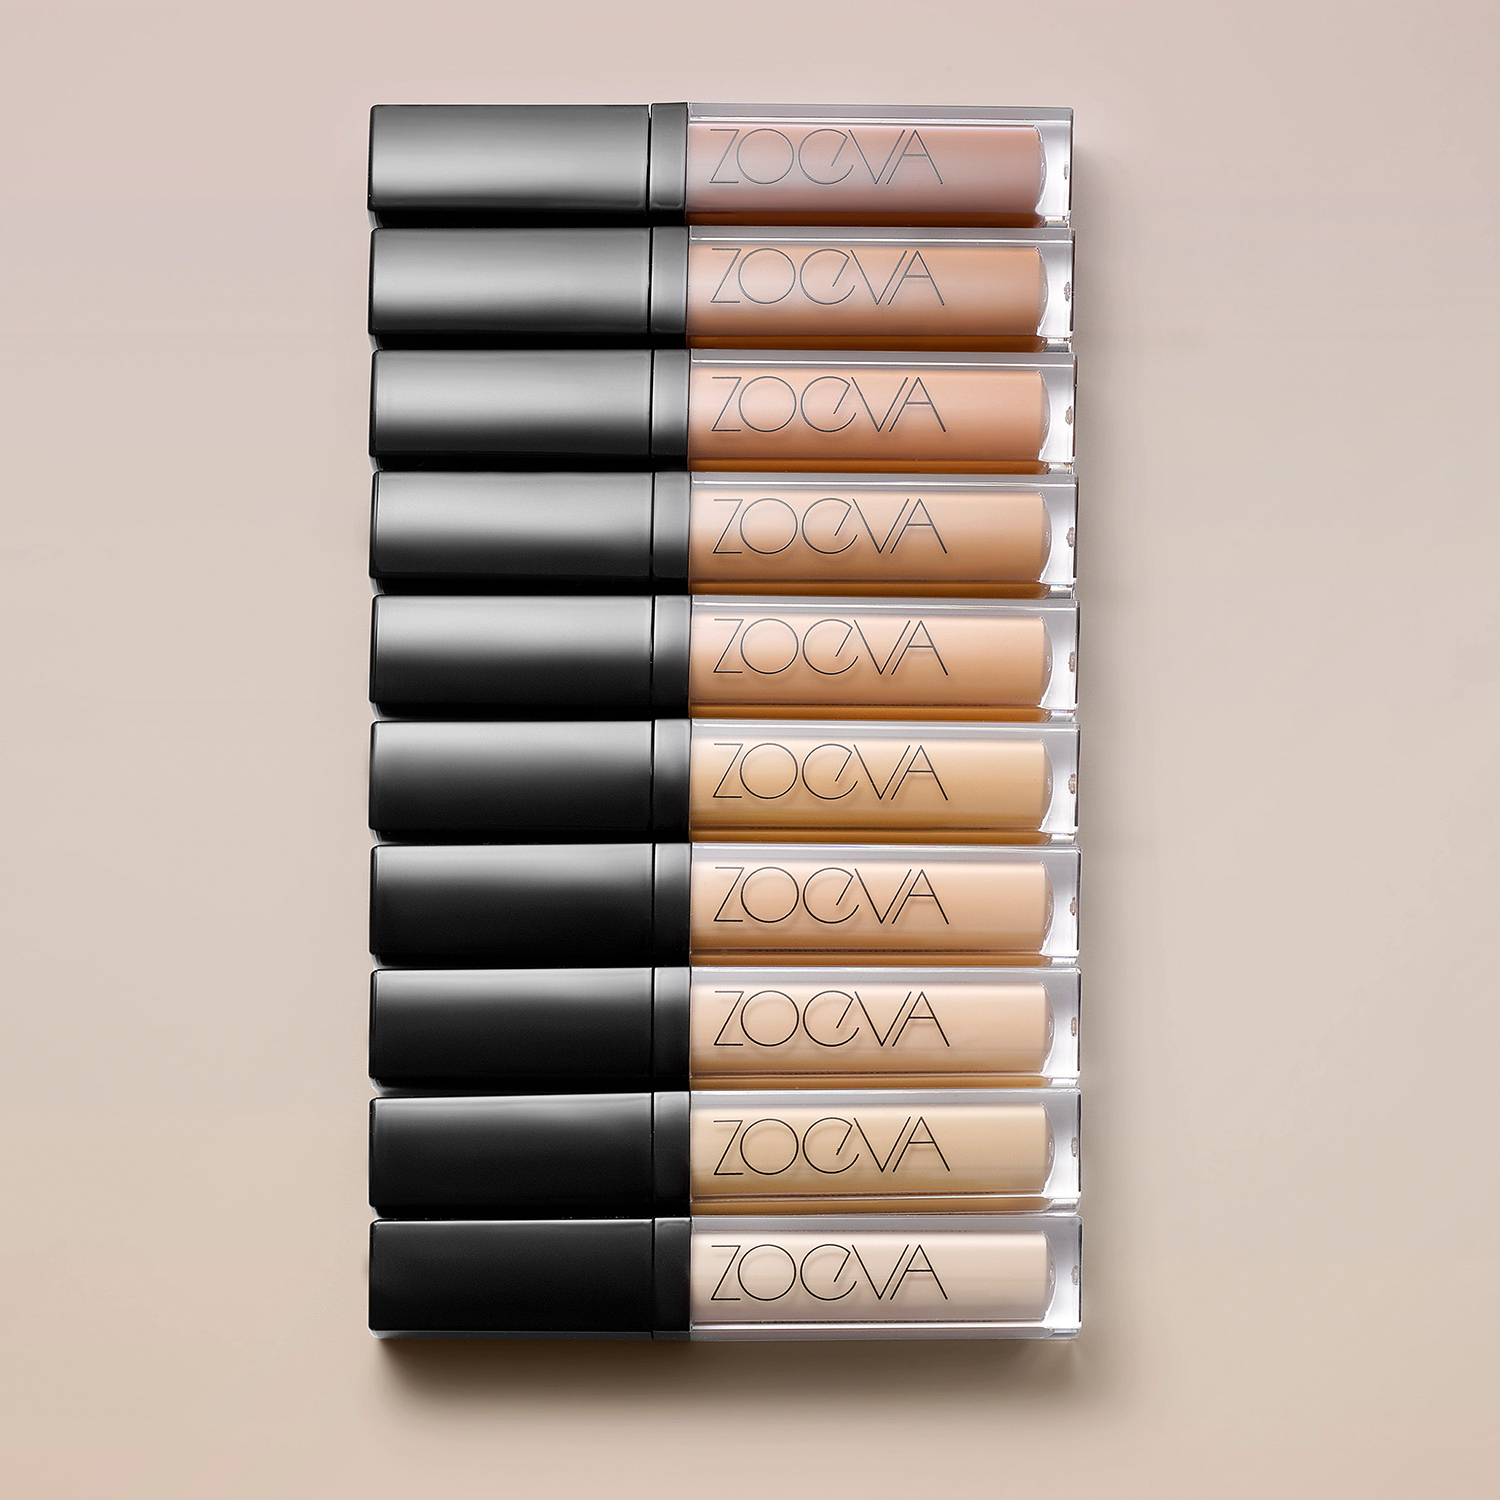 ZOEVA Cosmetics on Twitter: "💓 Tell your unique story, beautifully with Authentik Skin Perfector Concealer. Choose 30 inclusive shades in neutral, peachy, or yellow undertone. Visit https://t.co/XIPMGGXXho to view our